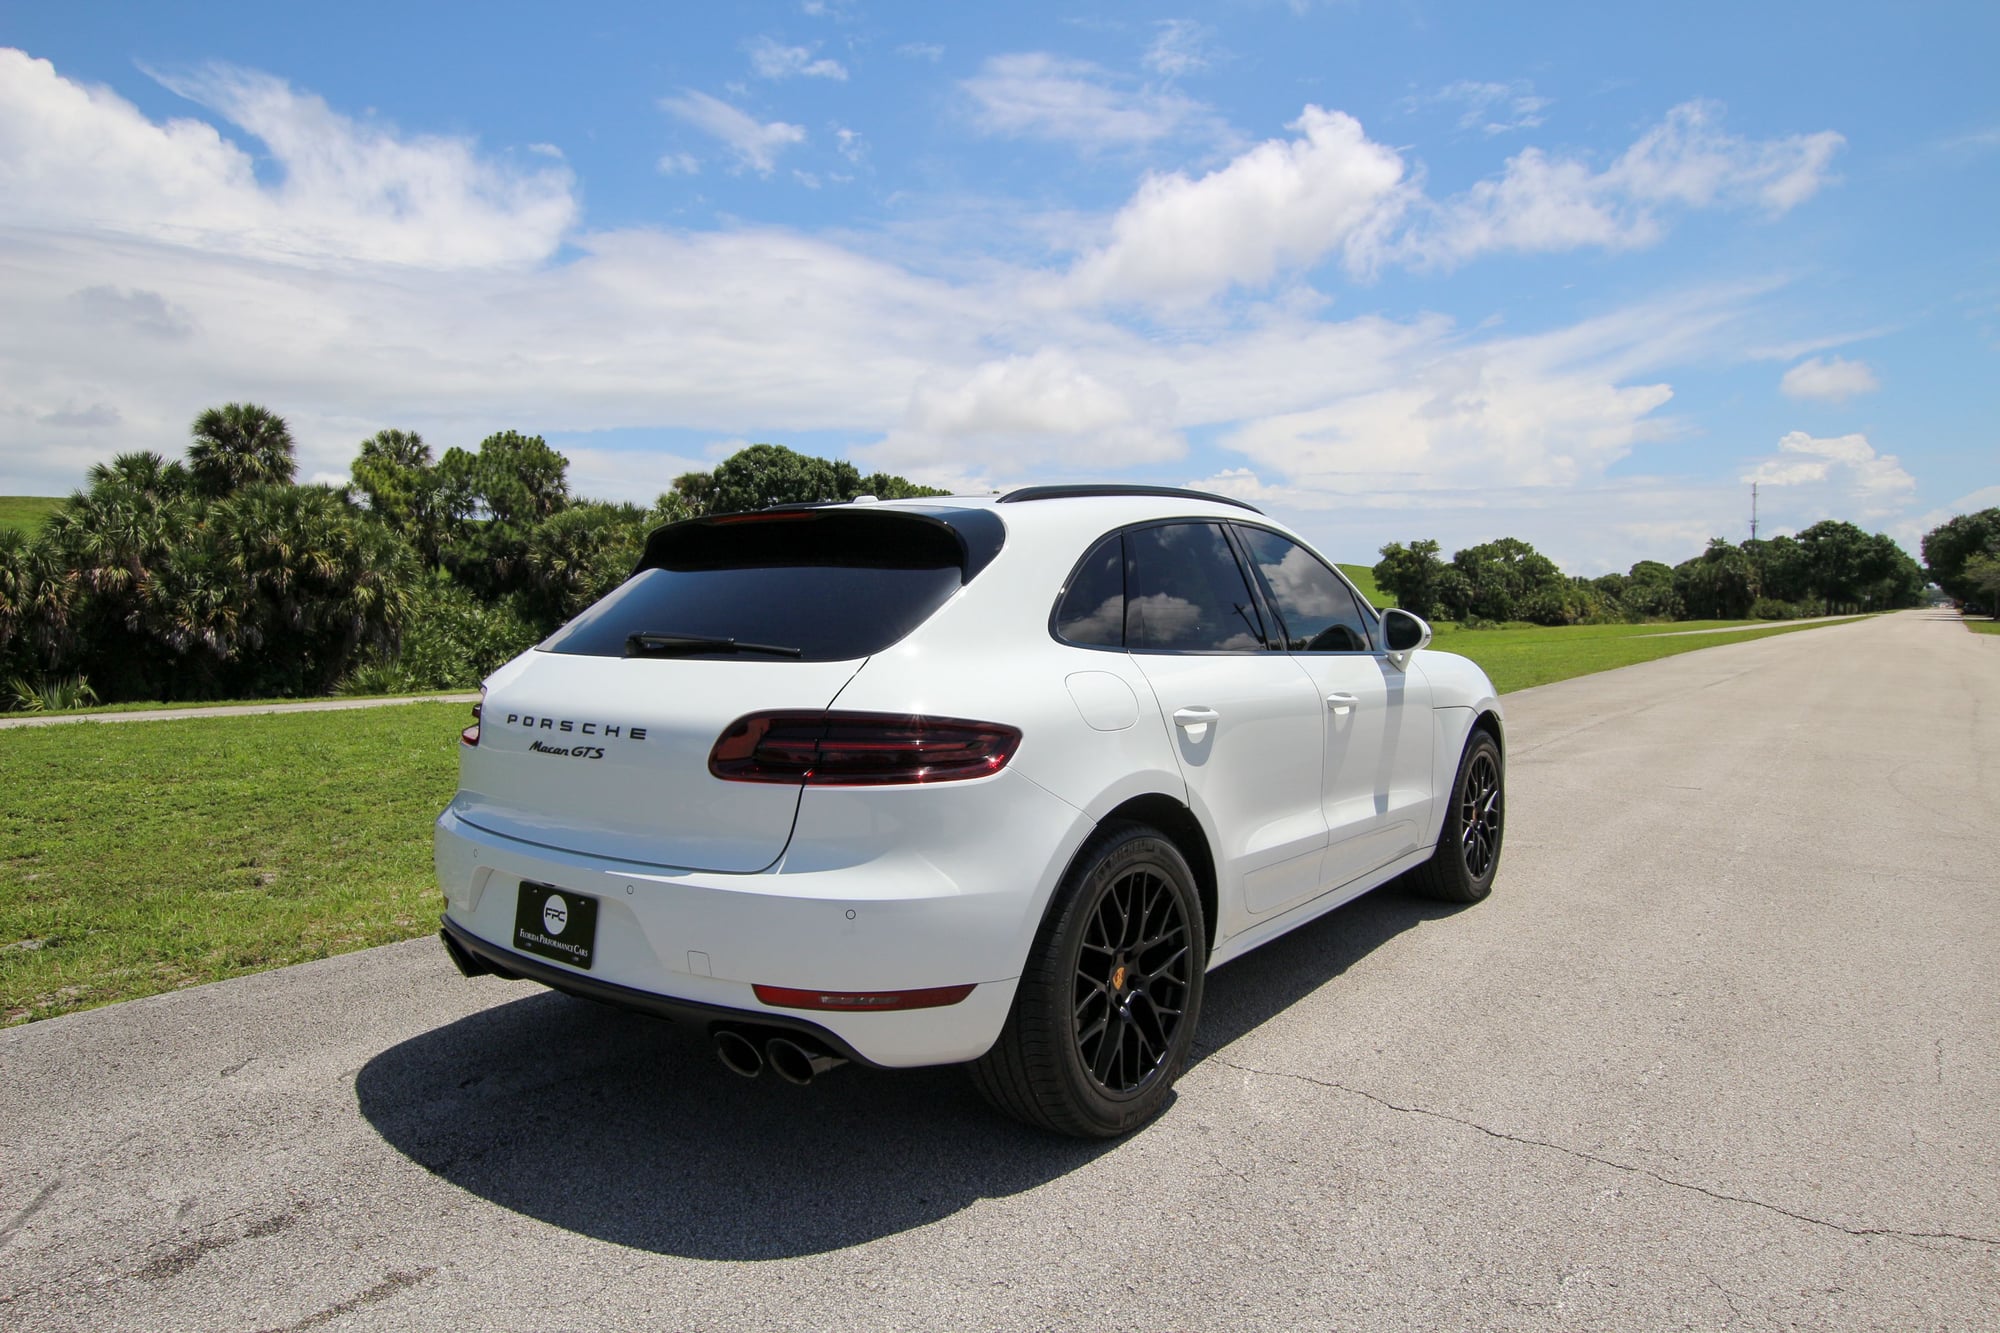 2017 Porsche Macan - 2017 Porshce Macan GTS w/ 7,406 miles - Used - VIN WP1AG2A53HLB52756 - 7,406 Miles - 6 cyl - AWD - Automatic - SUV - White - Riviera Beach, FL 33407, United States